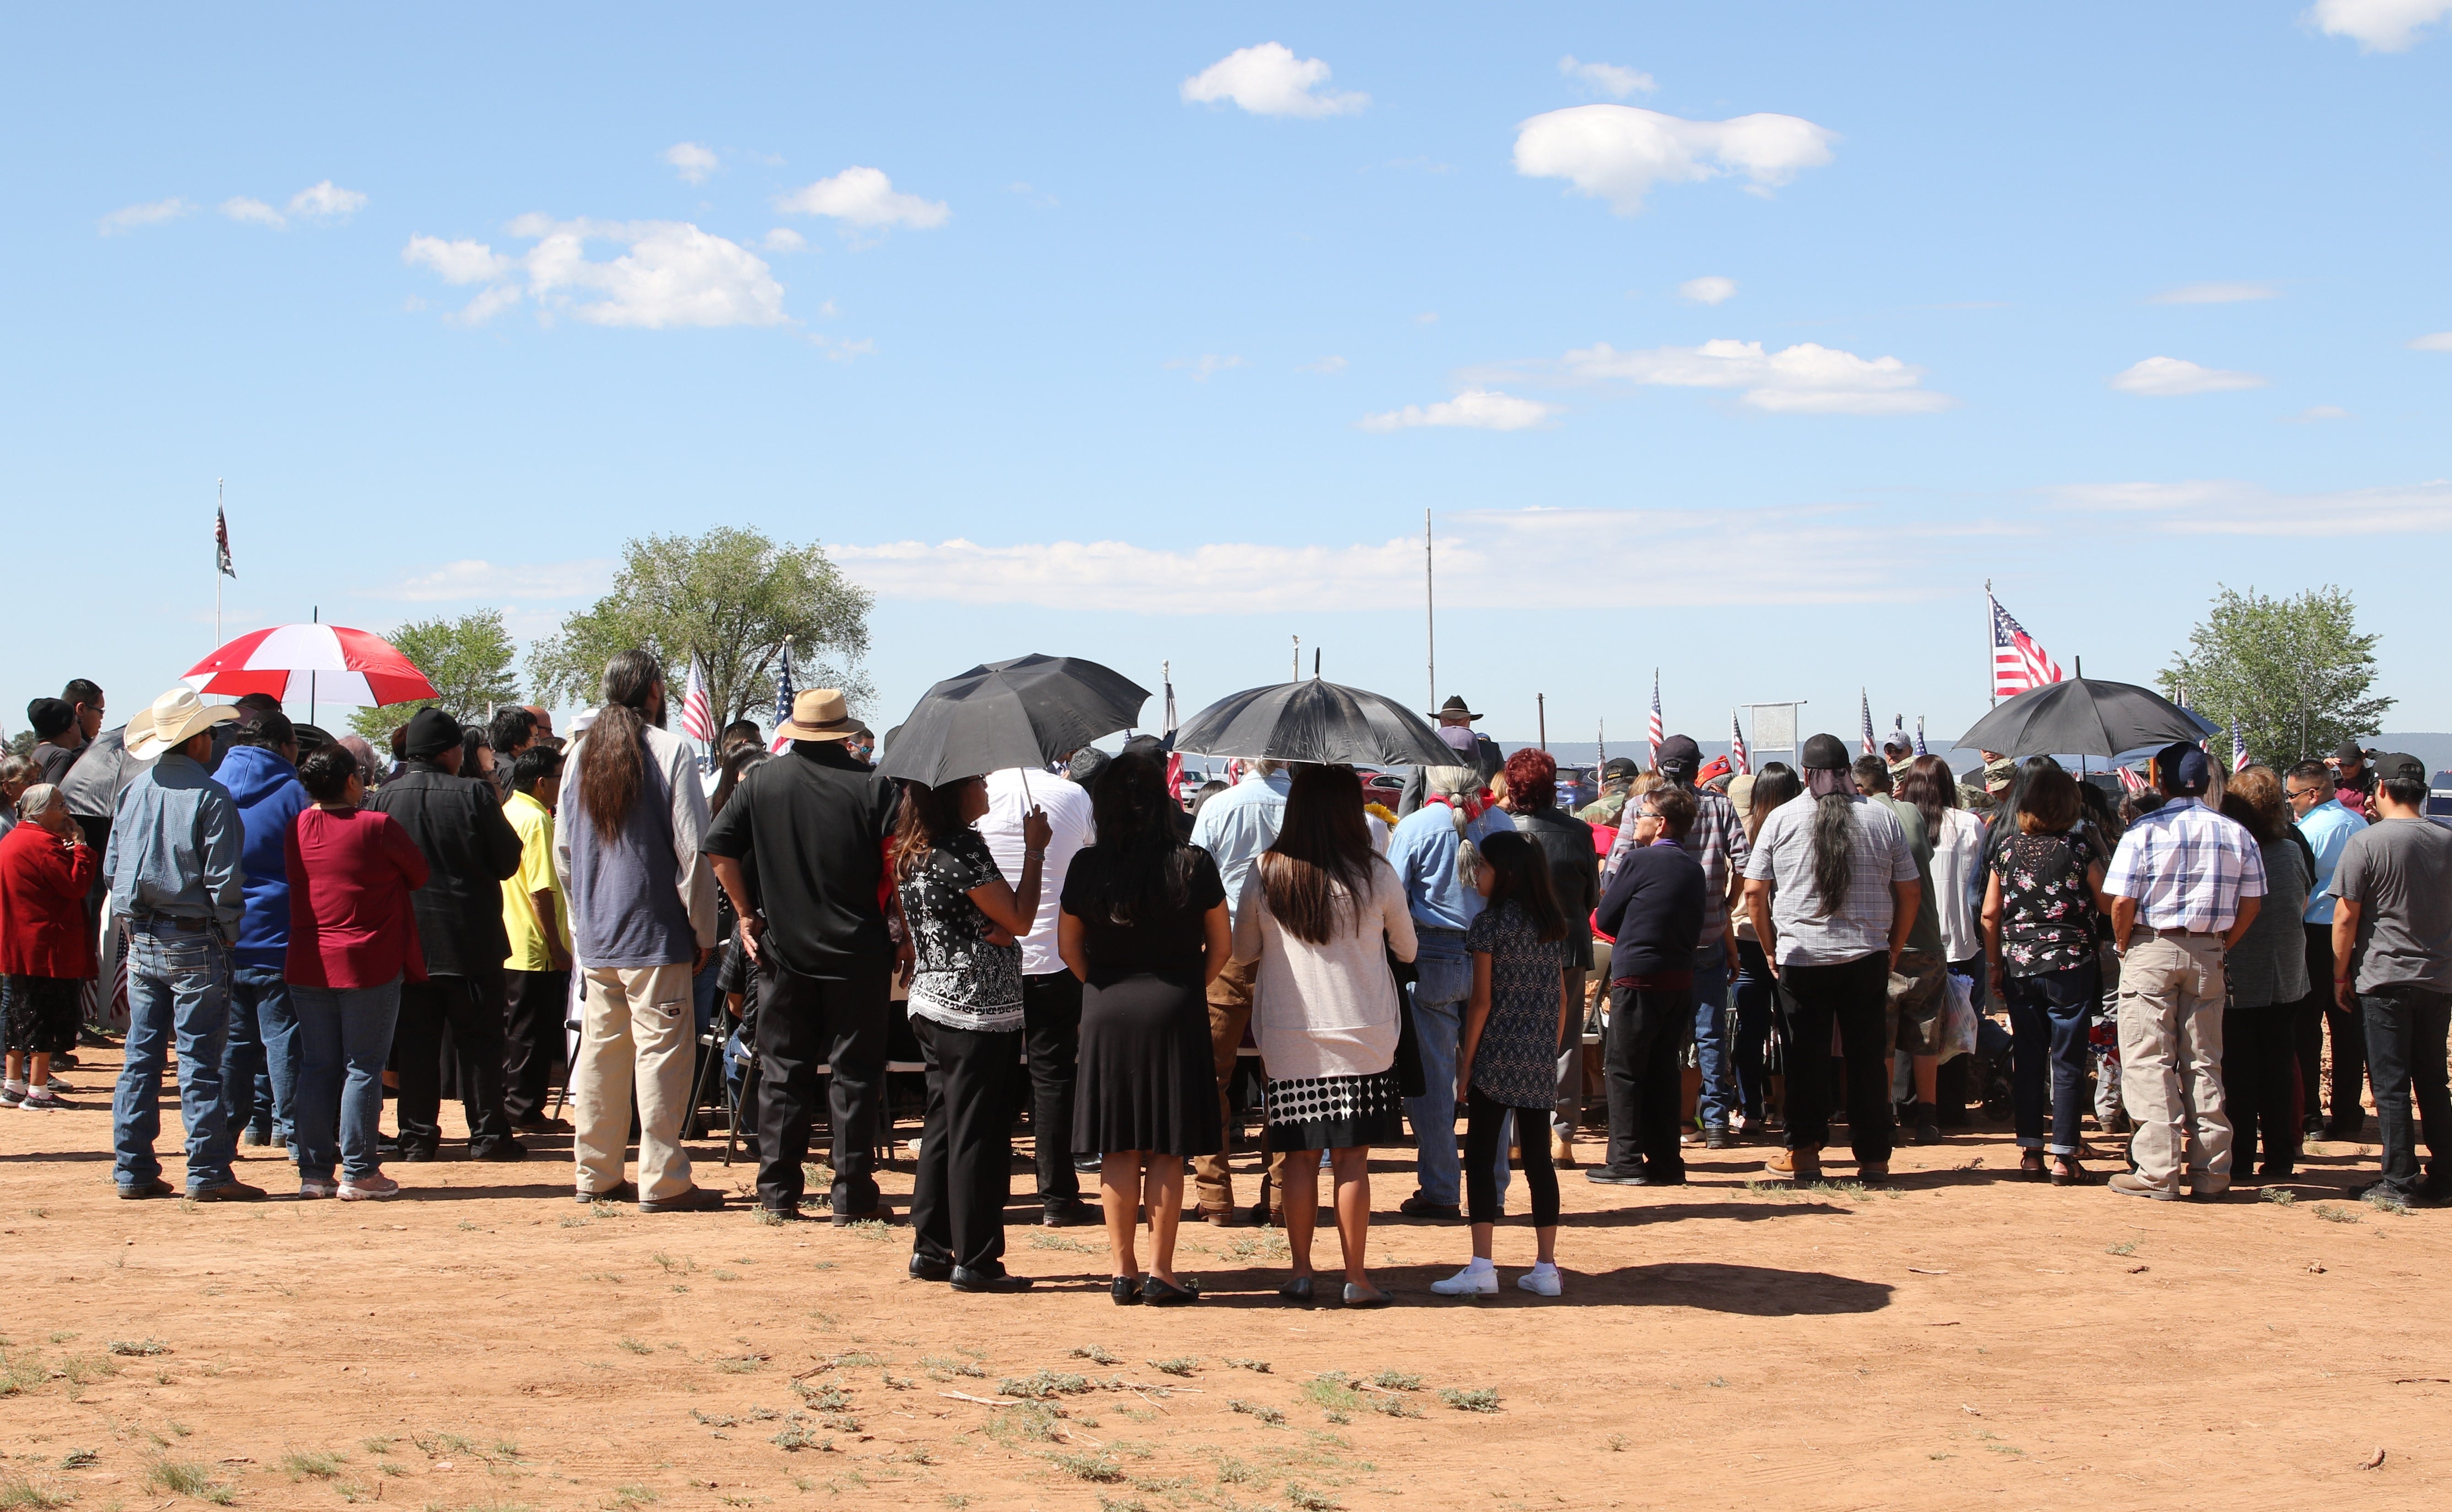 Family members of Navajo Code Talker William Tully Brown Sr. attend his memorial service on June 6 at the Fort Defiance Veterans Cemetery in Fort Defiance, Ariz.